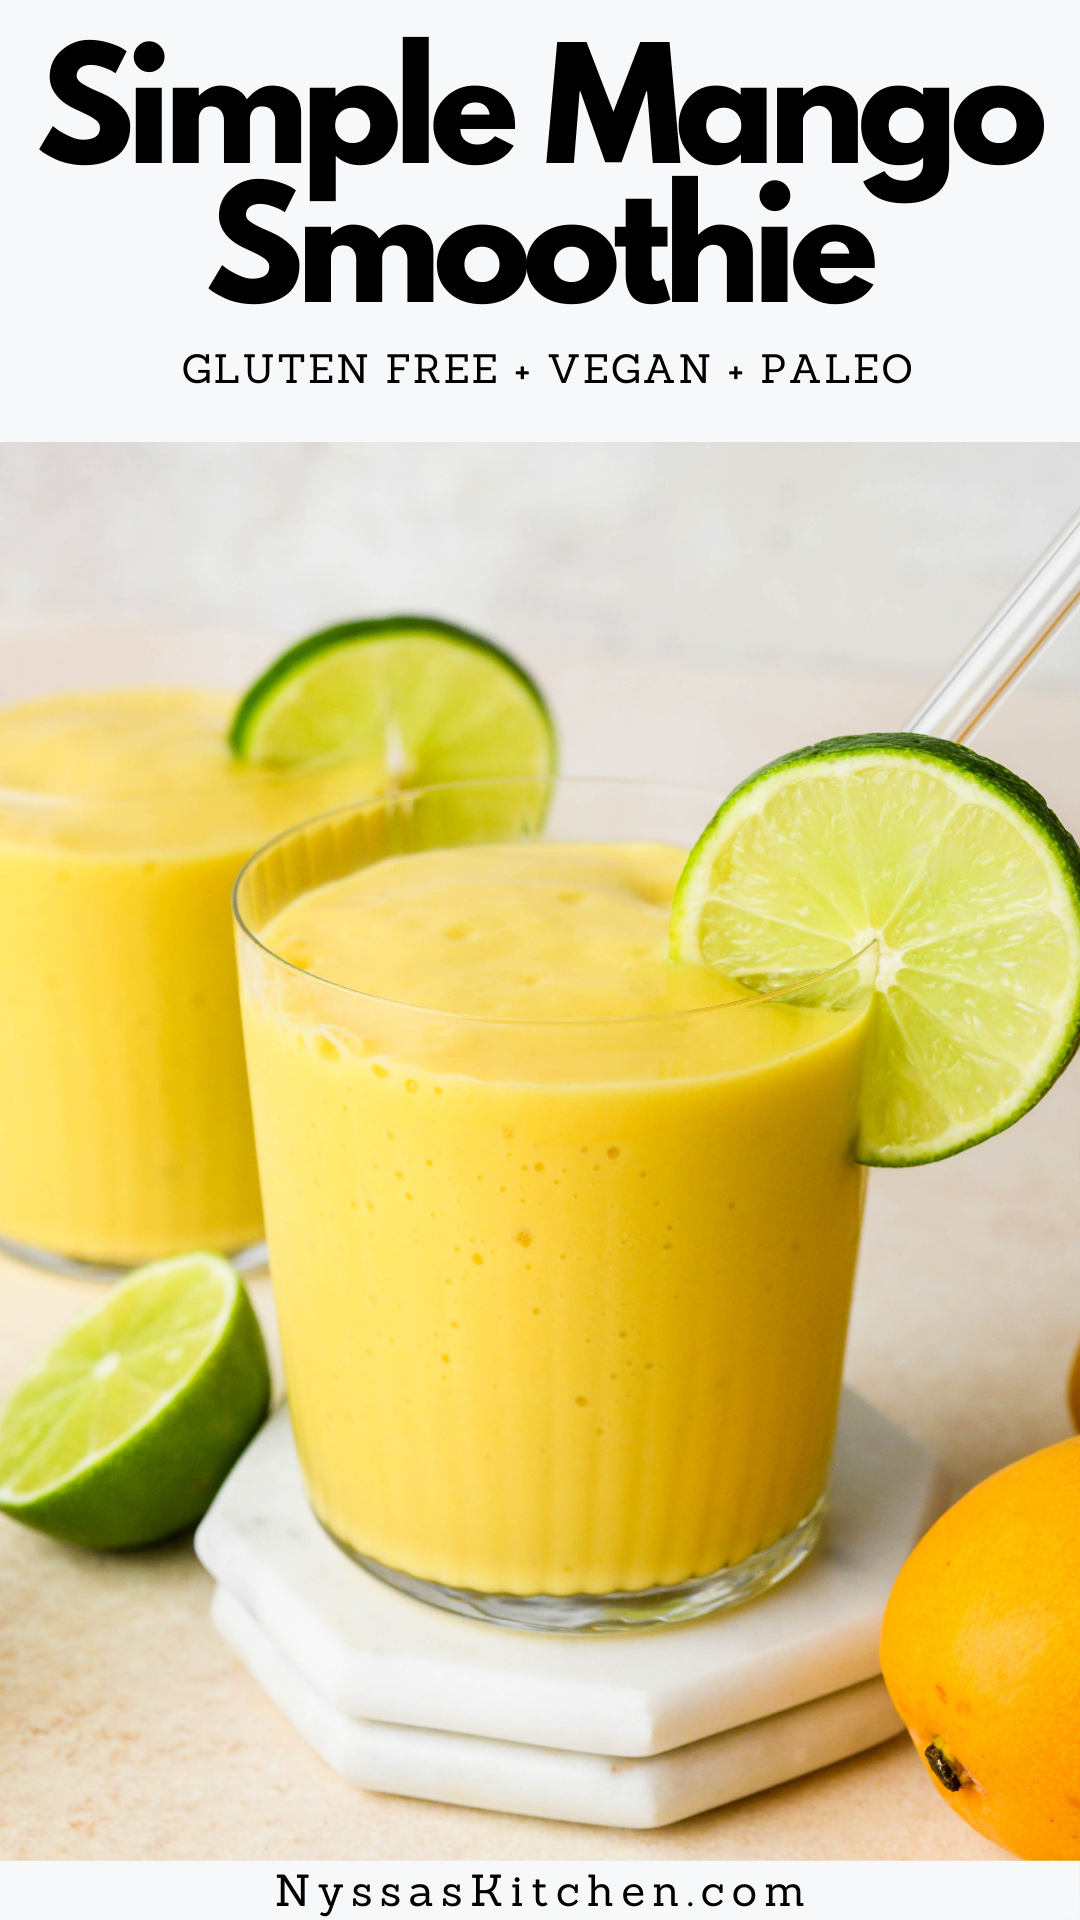 This simple mango smoothie is creamy and refreshing and made with only 5 ingredients and no yogurt! It's a great addition to any breakfast spread and the perfect afternoon snack. Made with fresh or frozen mango, banana (I include an option to make without banana, too!), lime juice, and dairy free milk. Gluten free, dairy free, vegan, and paleo.